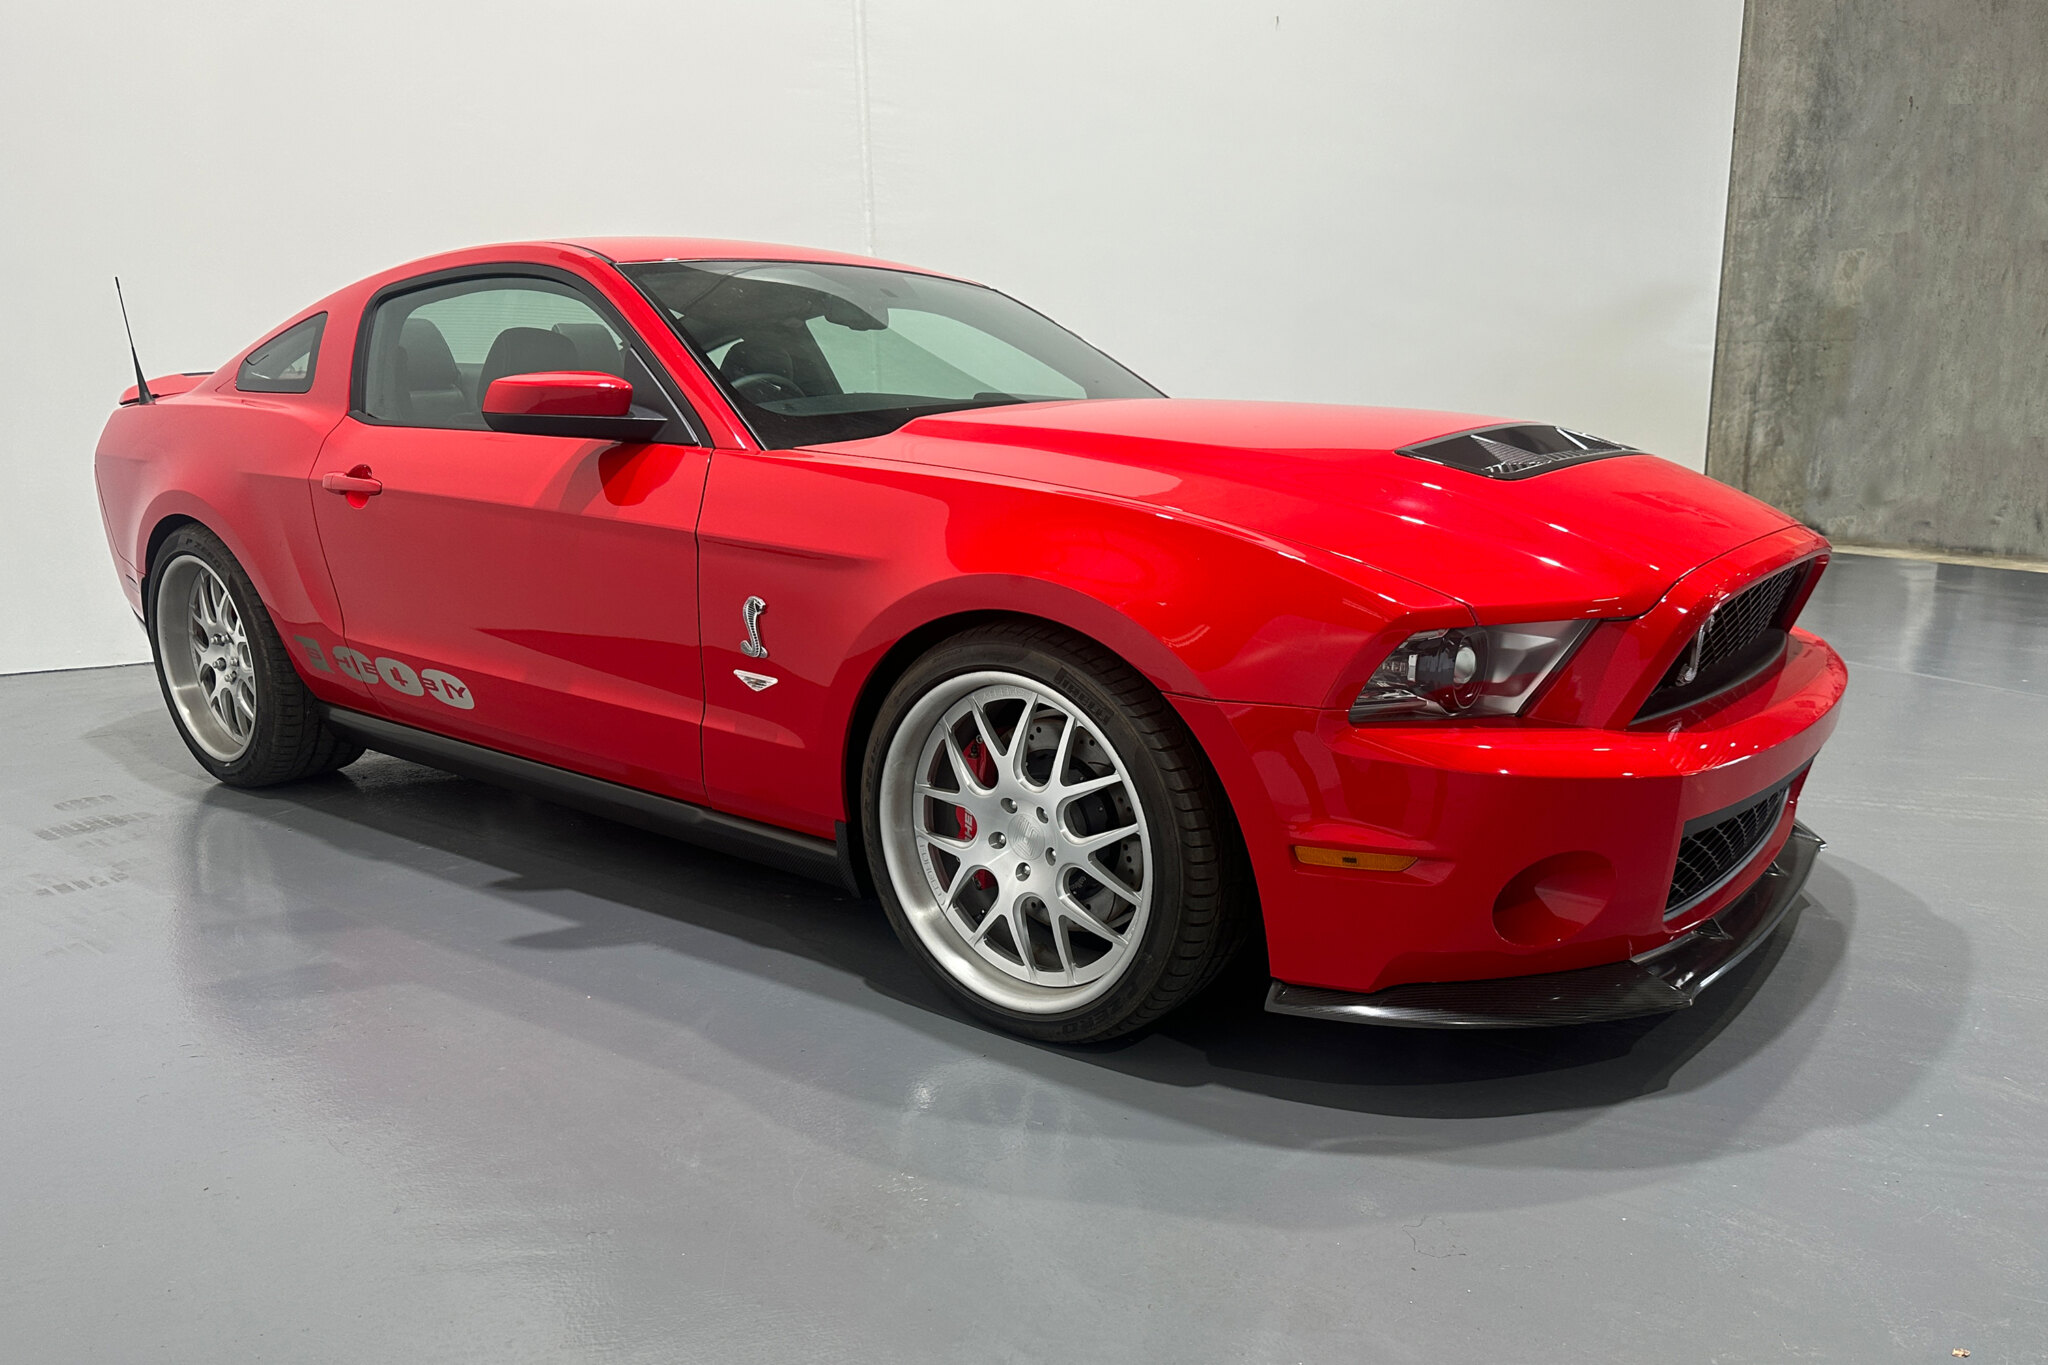 Auction watch: 2012 Mustang Shelby 1000